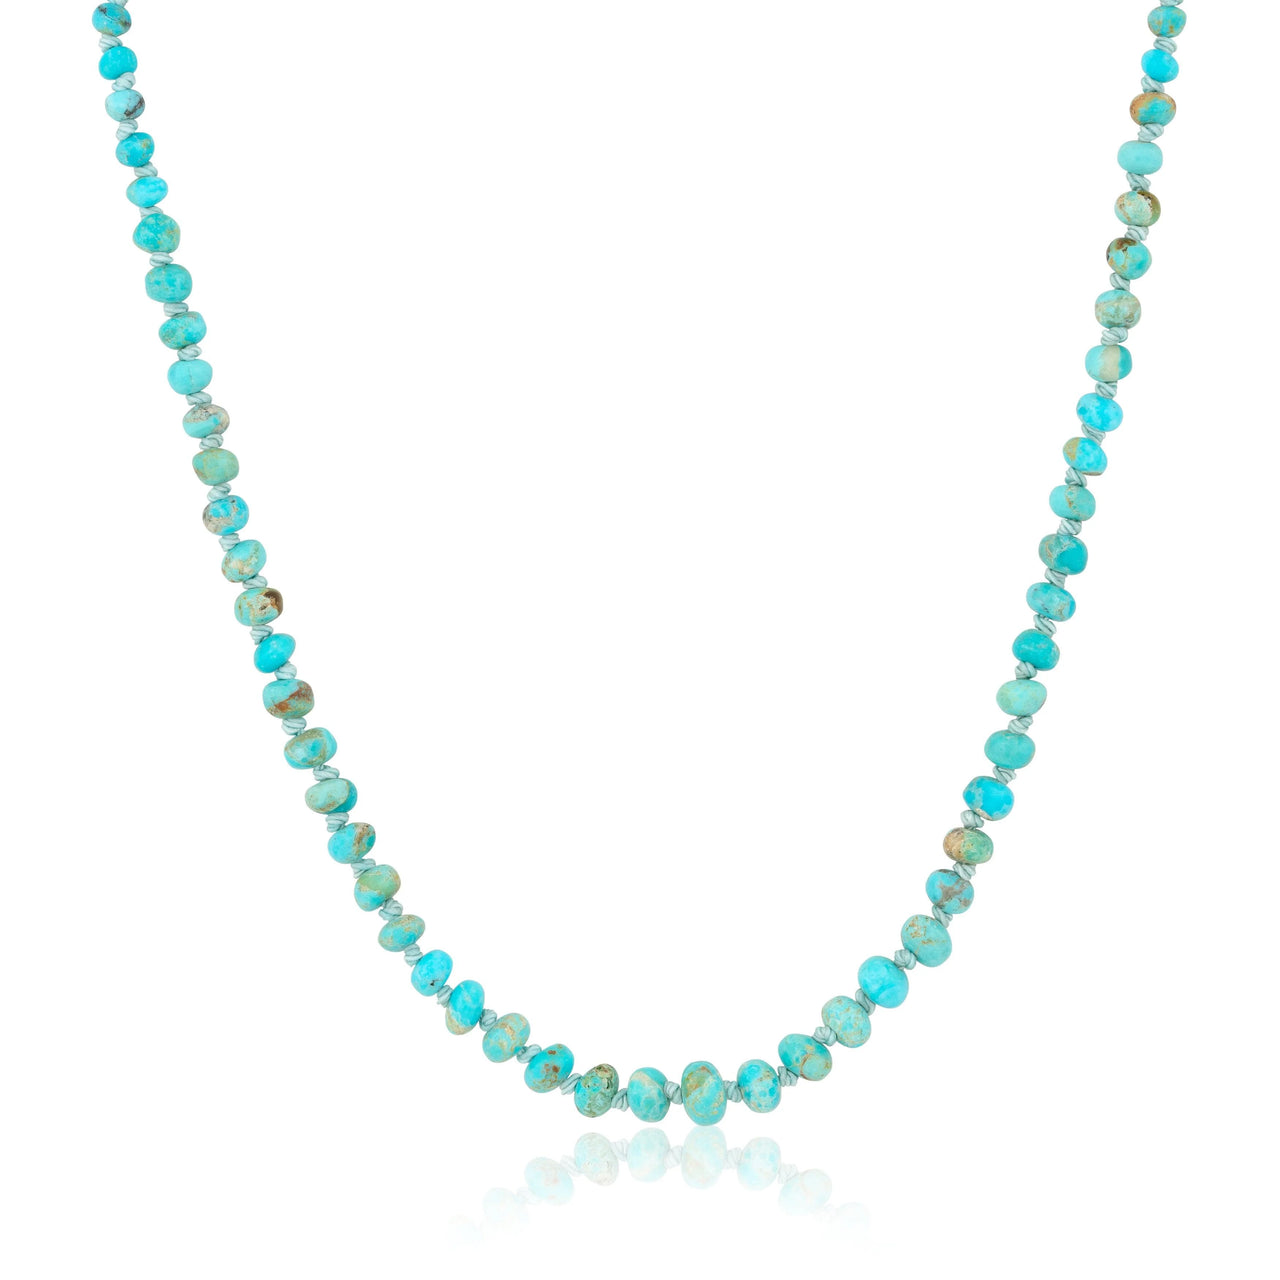 KNOTTED CANDY NECKLACE - TURQUOISE